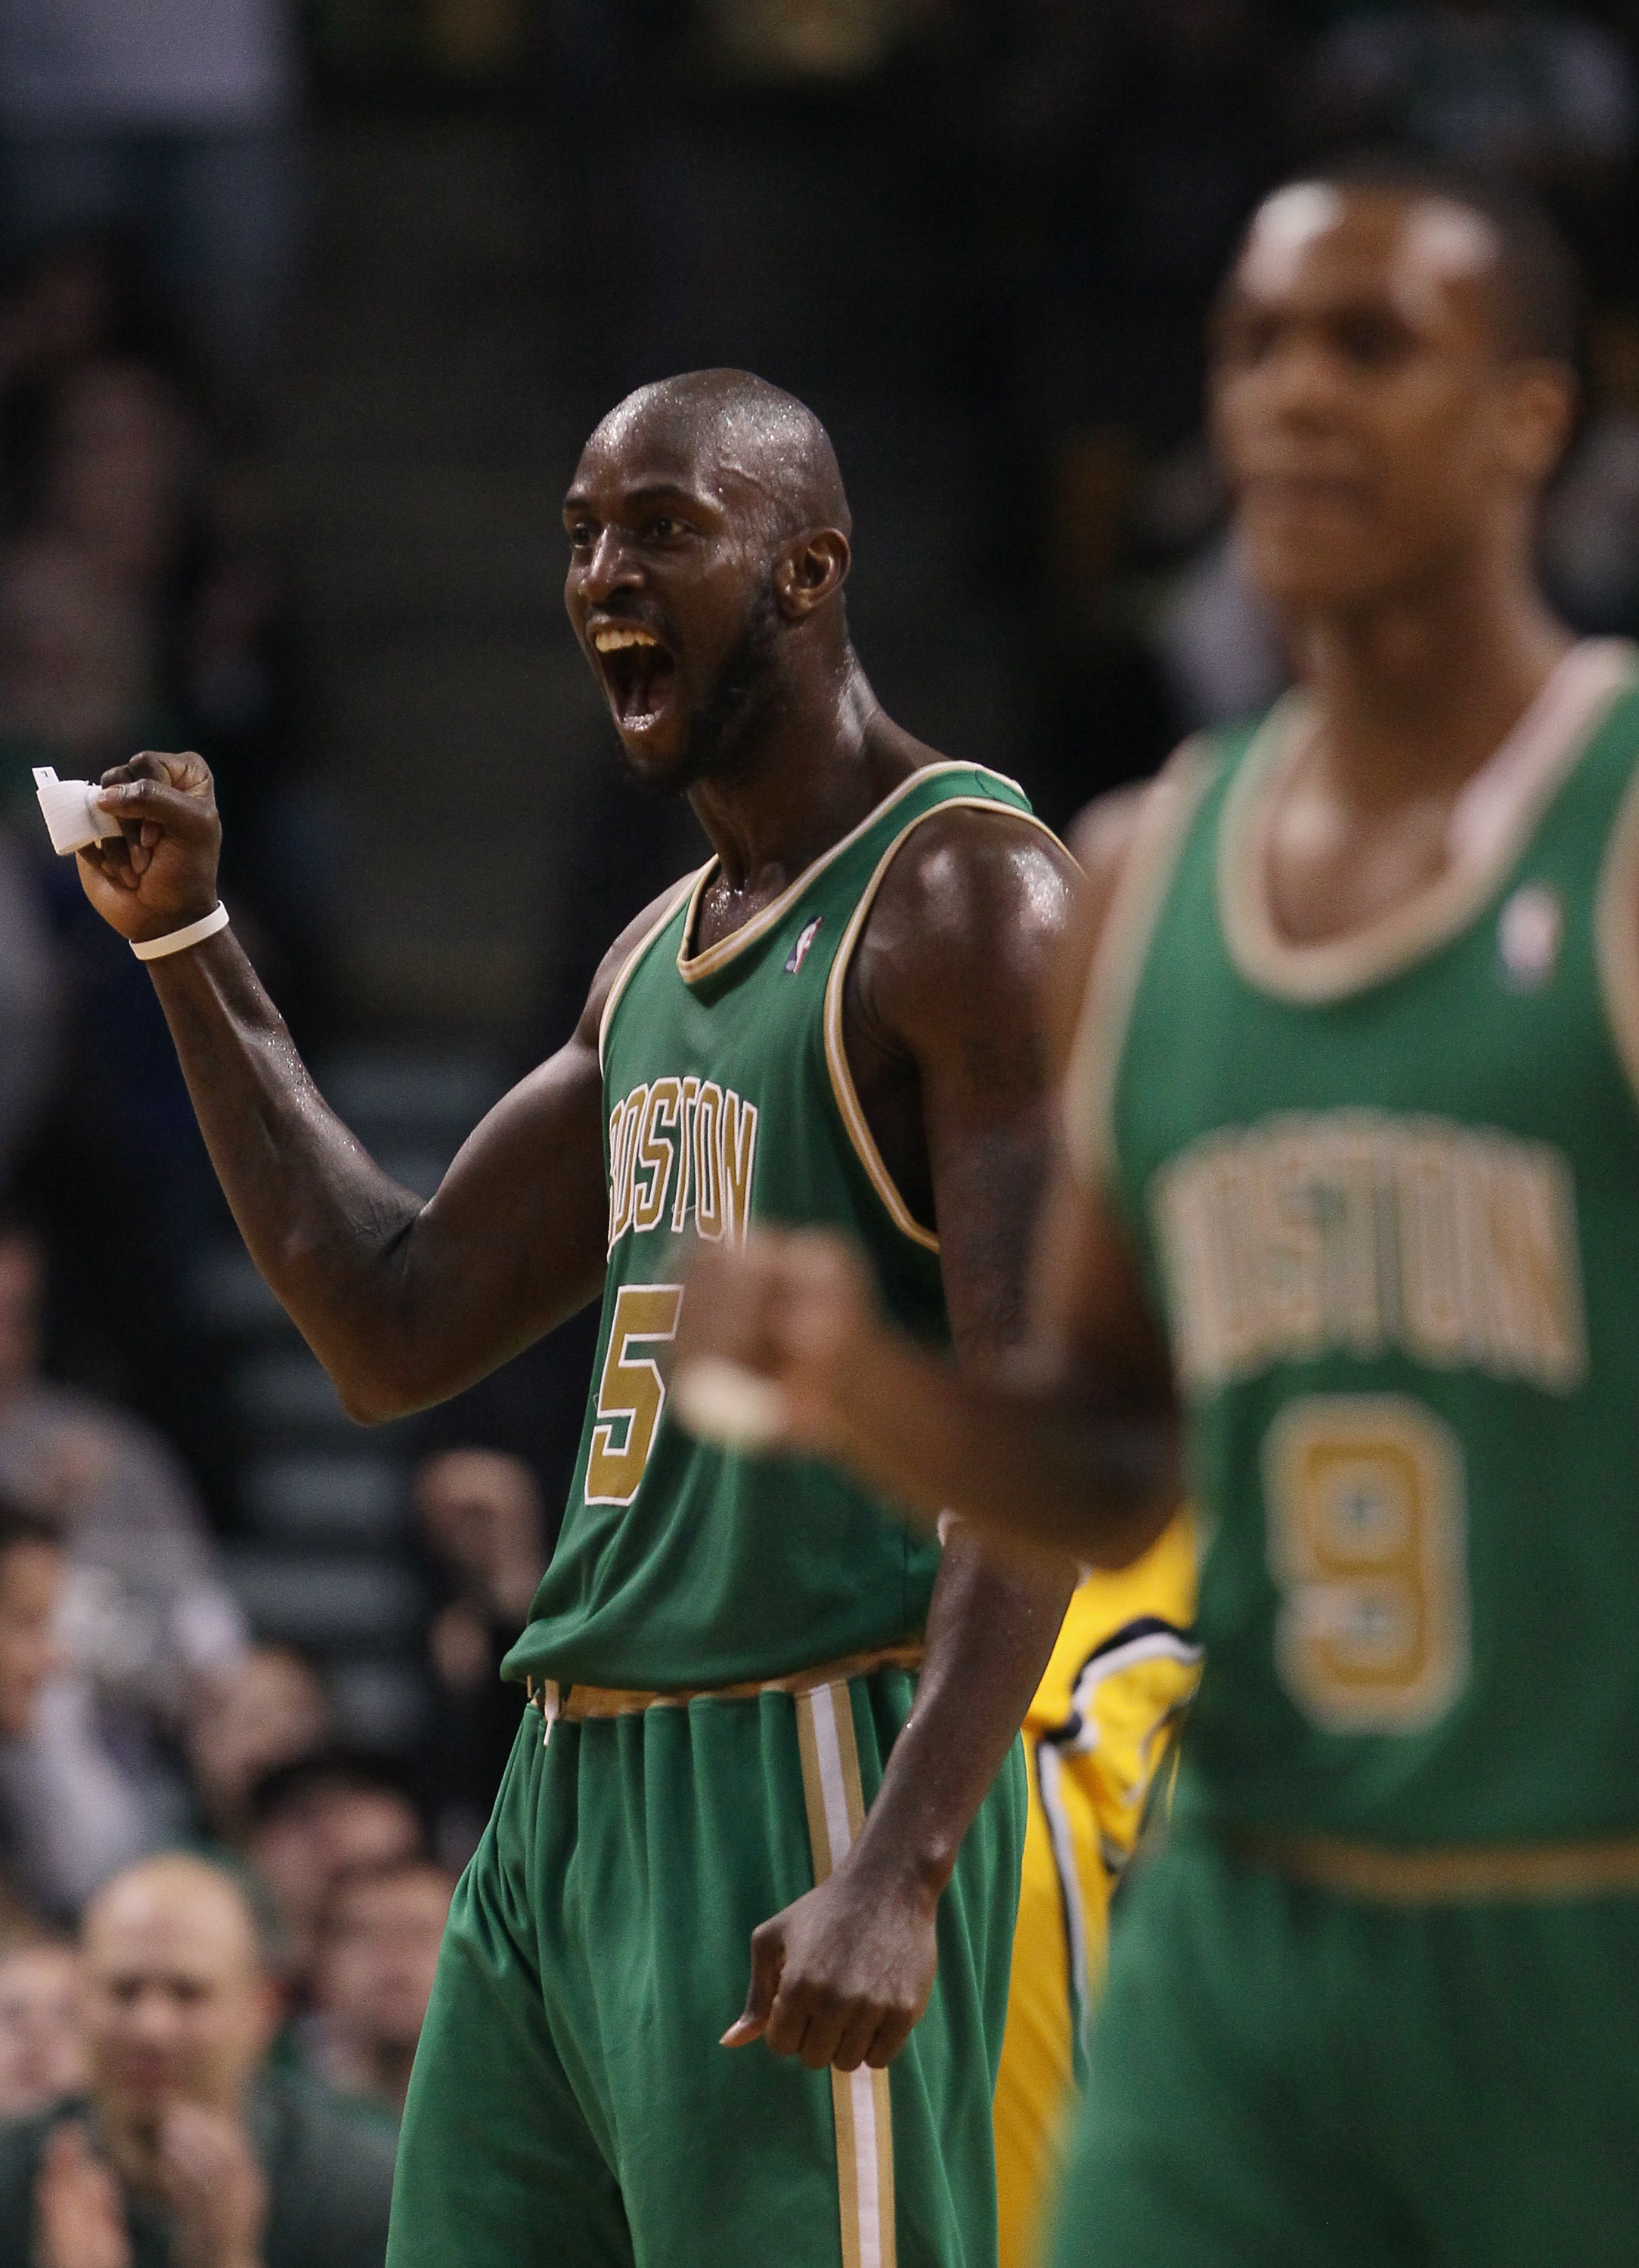 BOSTON, MA - MARCH 16:  Kevin Garnett #5 and Rajon Rondo #9 of the Boston Celtics celebrate after teammate Ray Allen drew the foul in the second half against the Indiana Pacers on March 16, 2011 at the TD Garden in Boston, Massachusetts. The Celtics defea